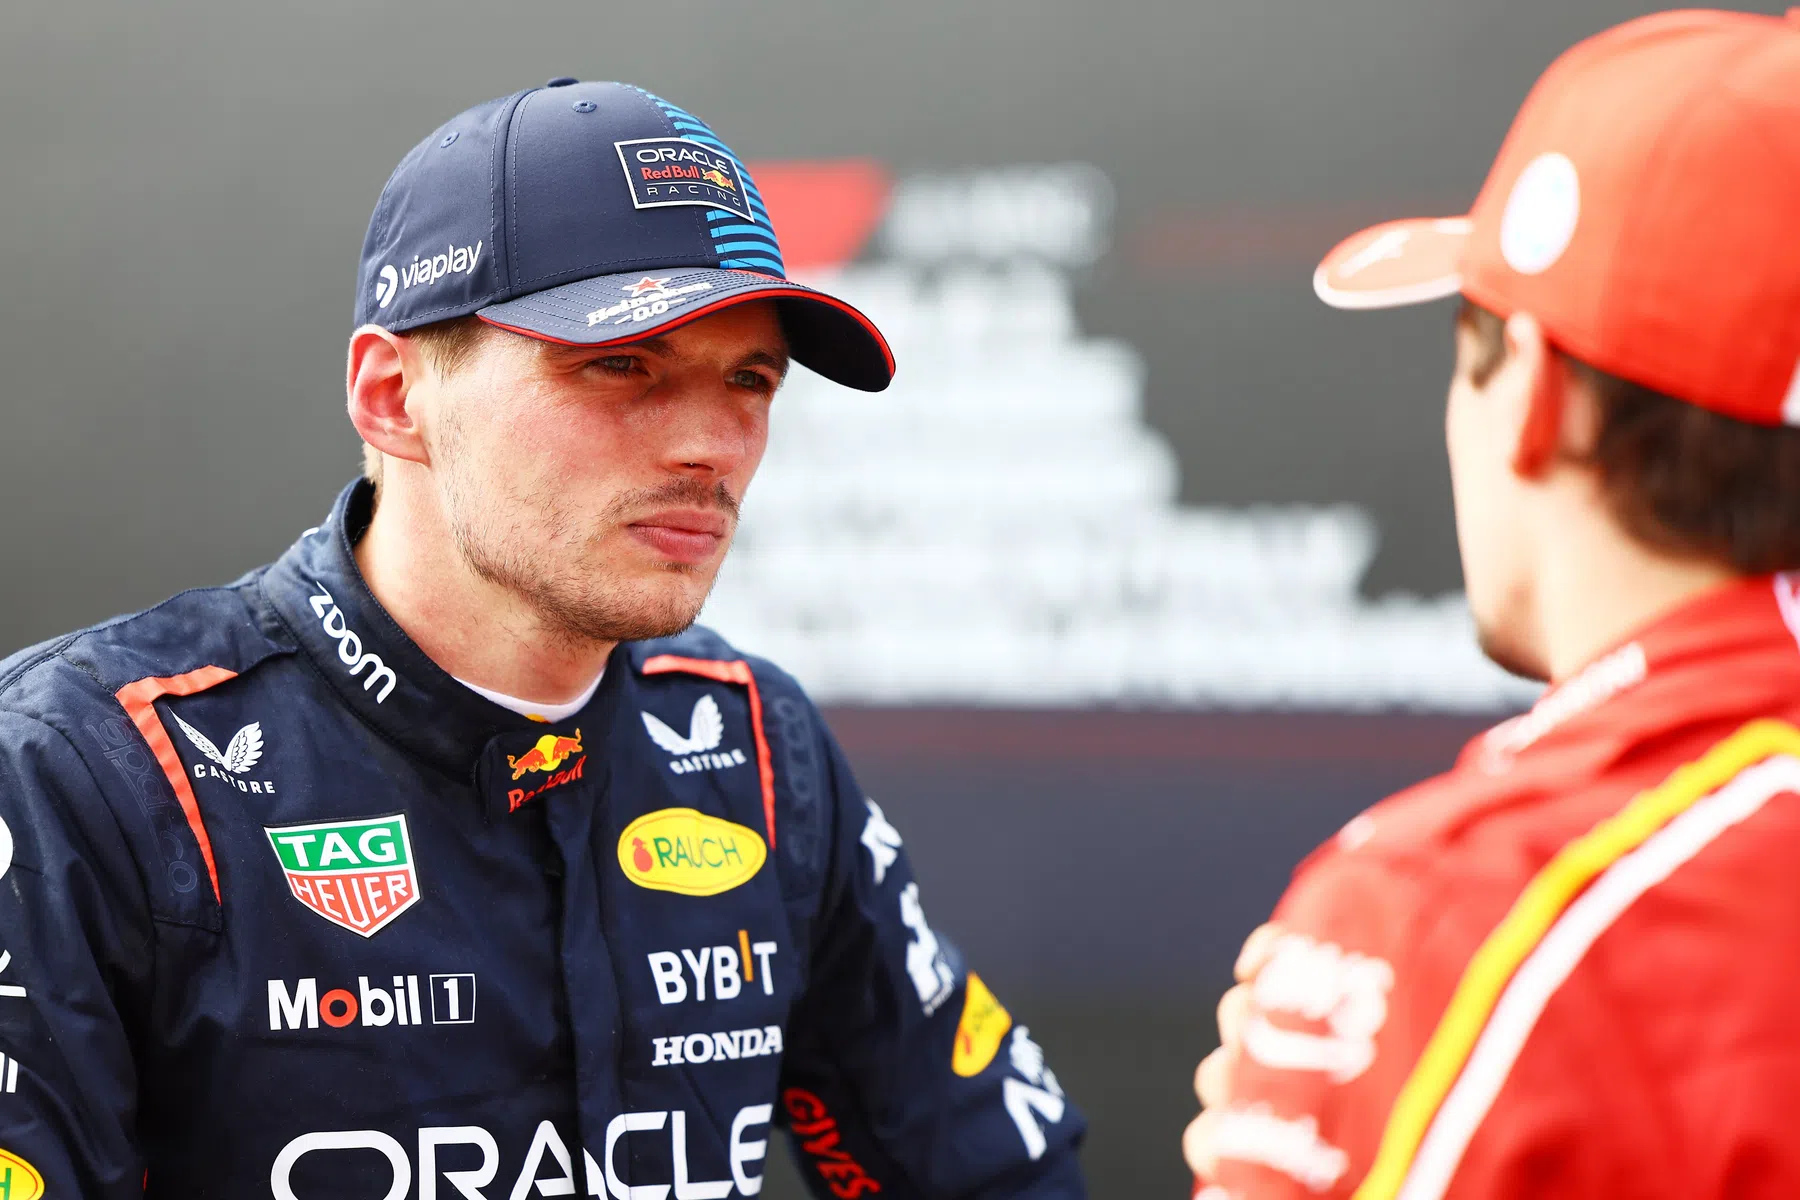 Leclerc on possible tensions with Verstappen as he battles for world title